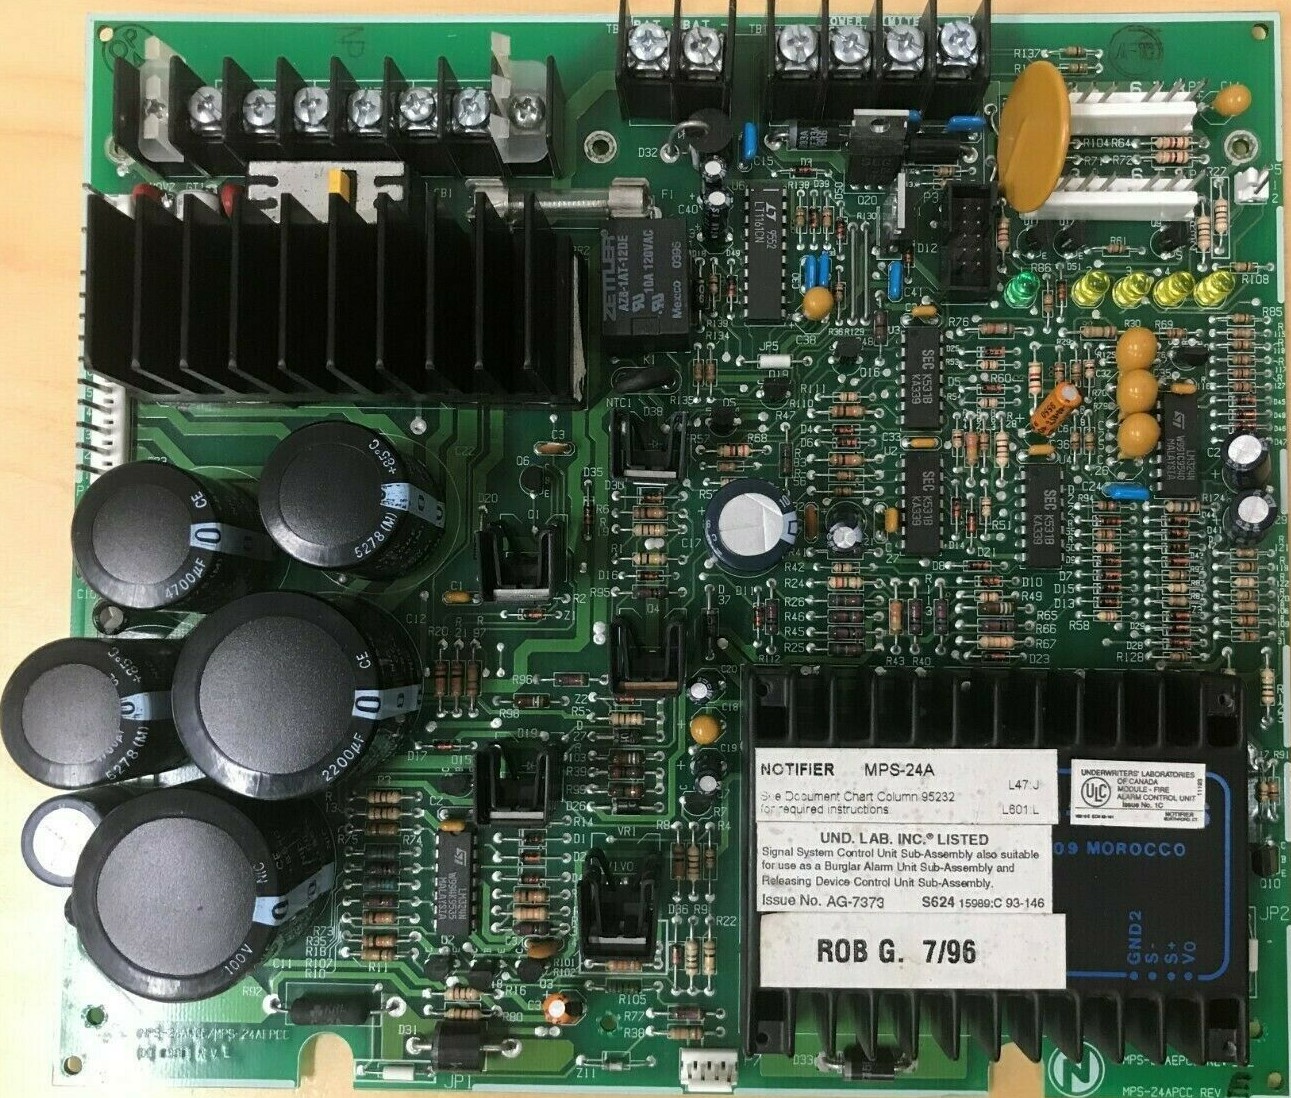 Notifier MPS-24A Power supply--Pulled from working system